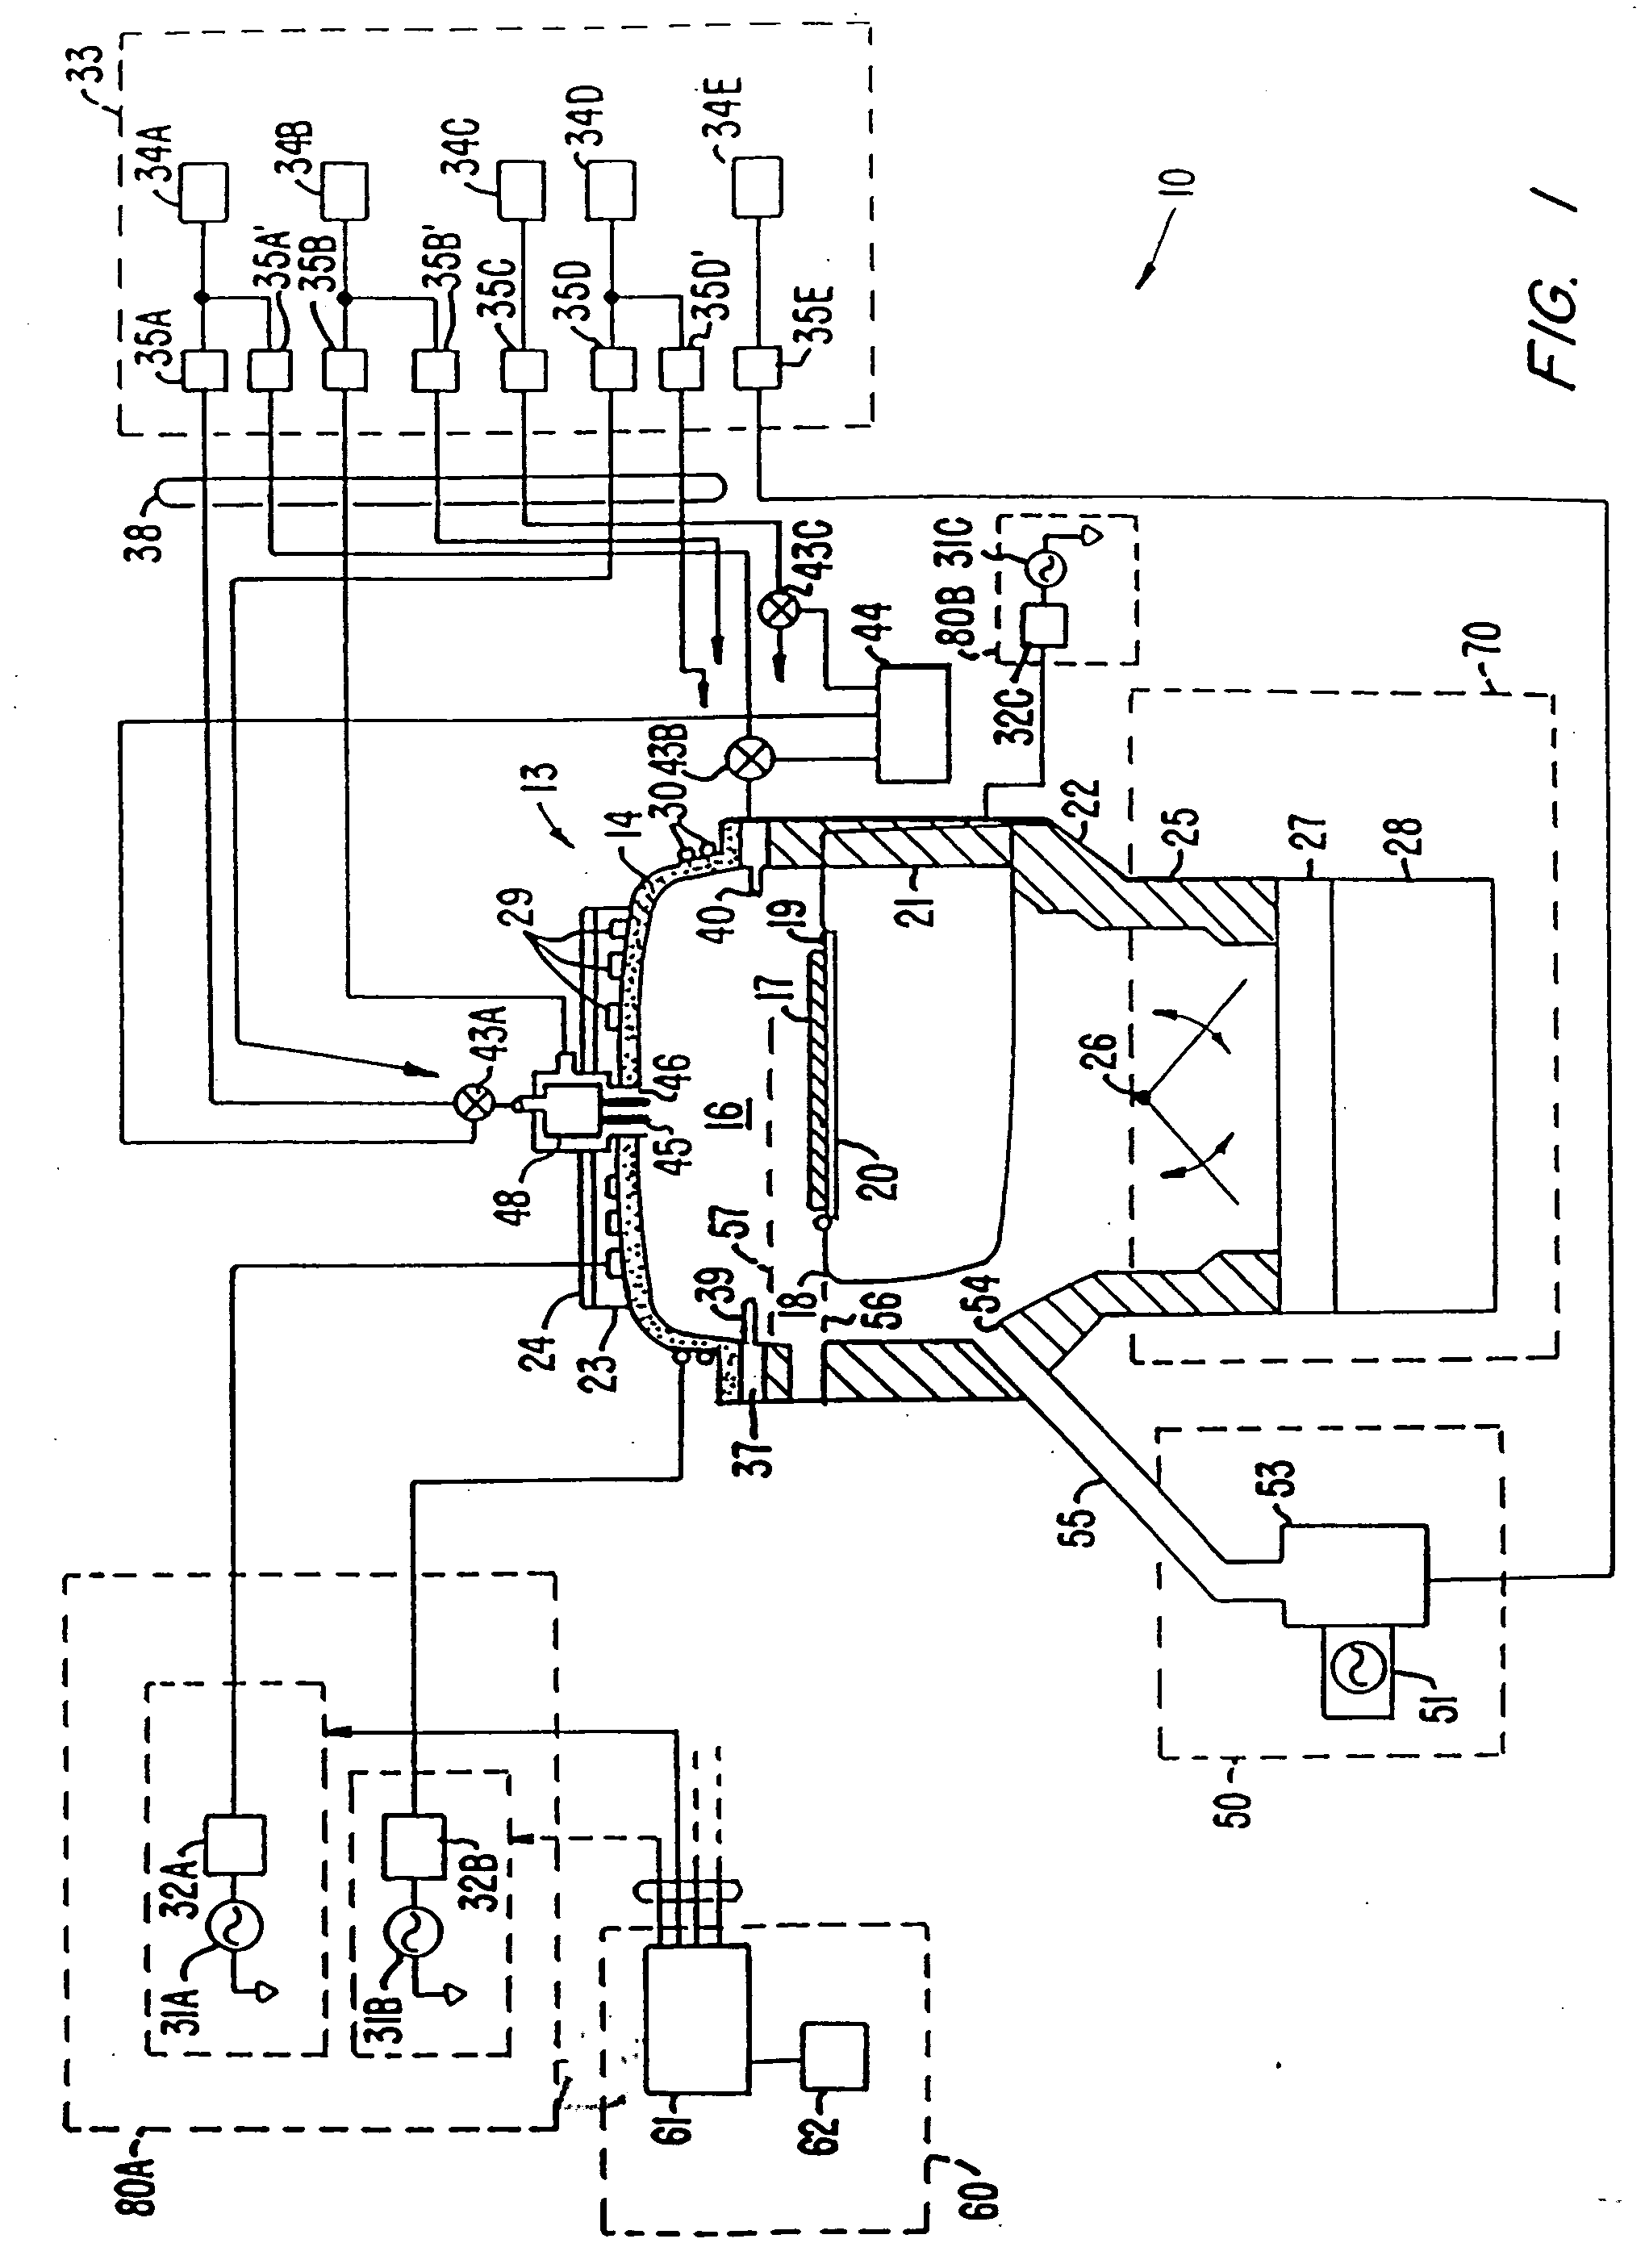 Gas distribution system for improved transient phase deposition